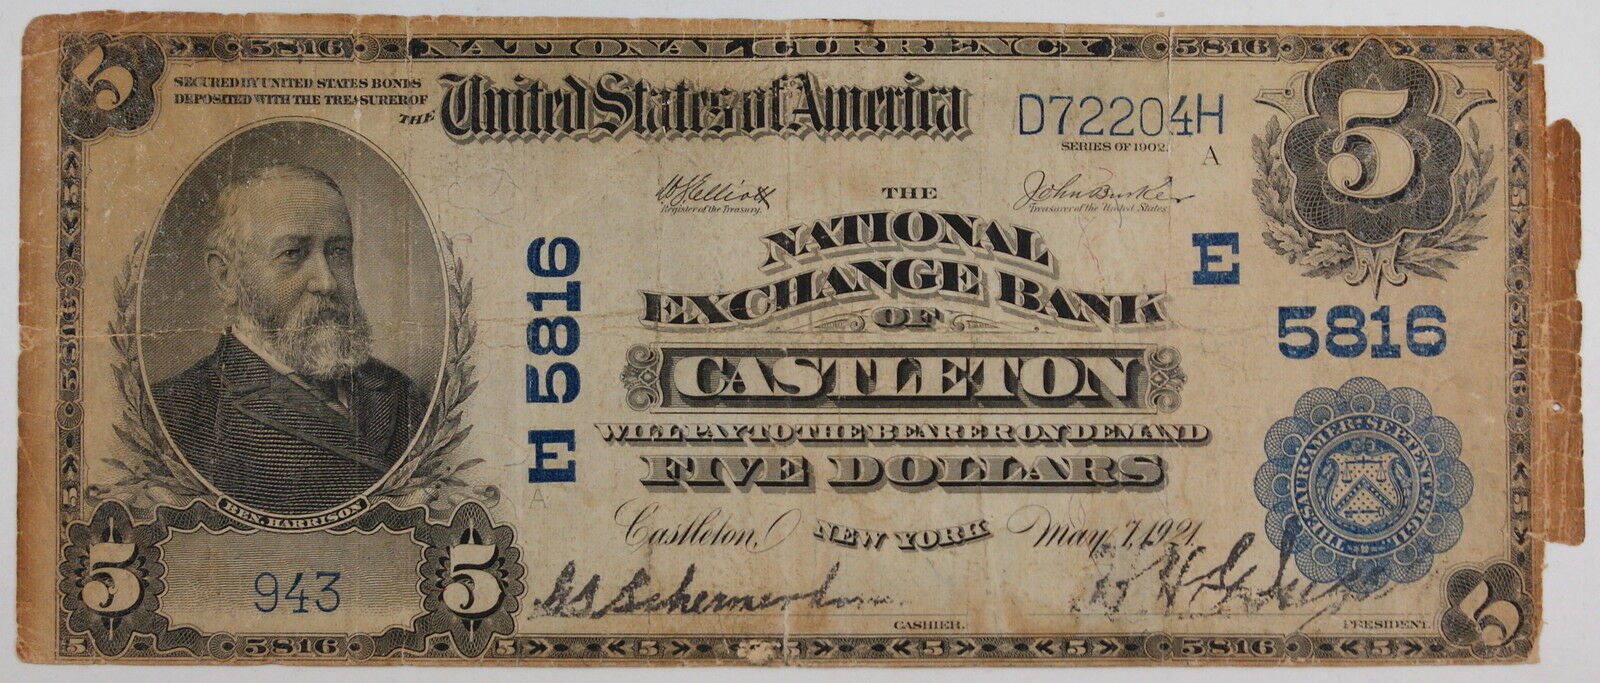 Series 1902 $5 National Currency Note, Castleton NY, E 5816